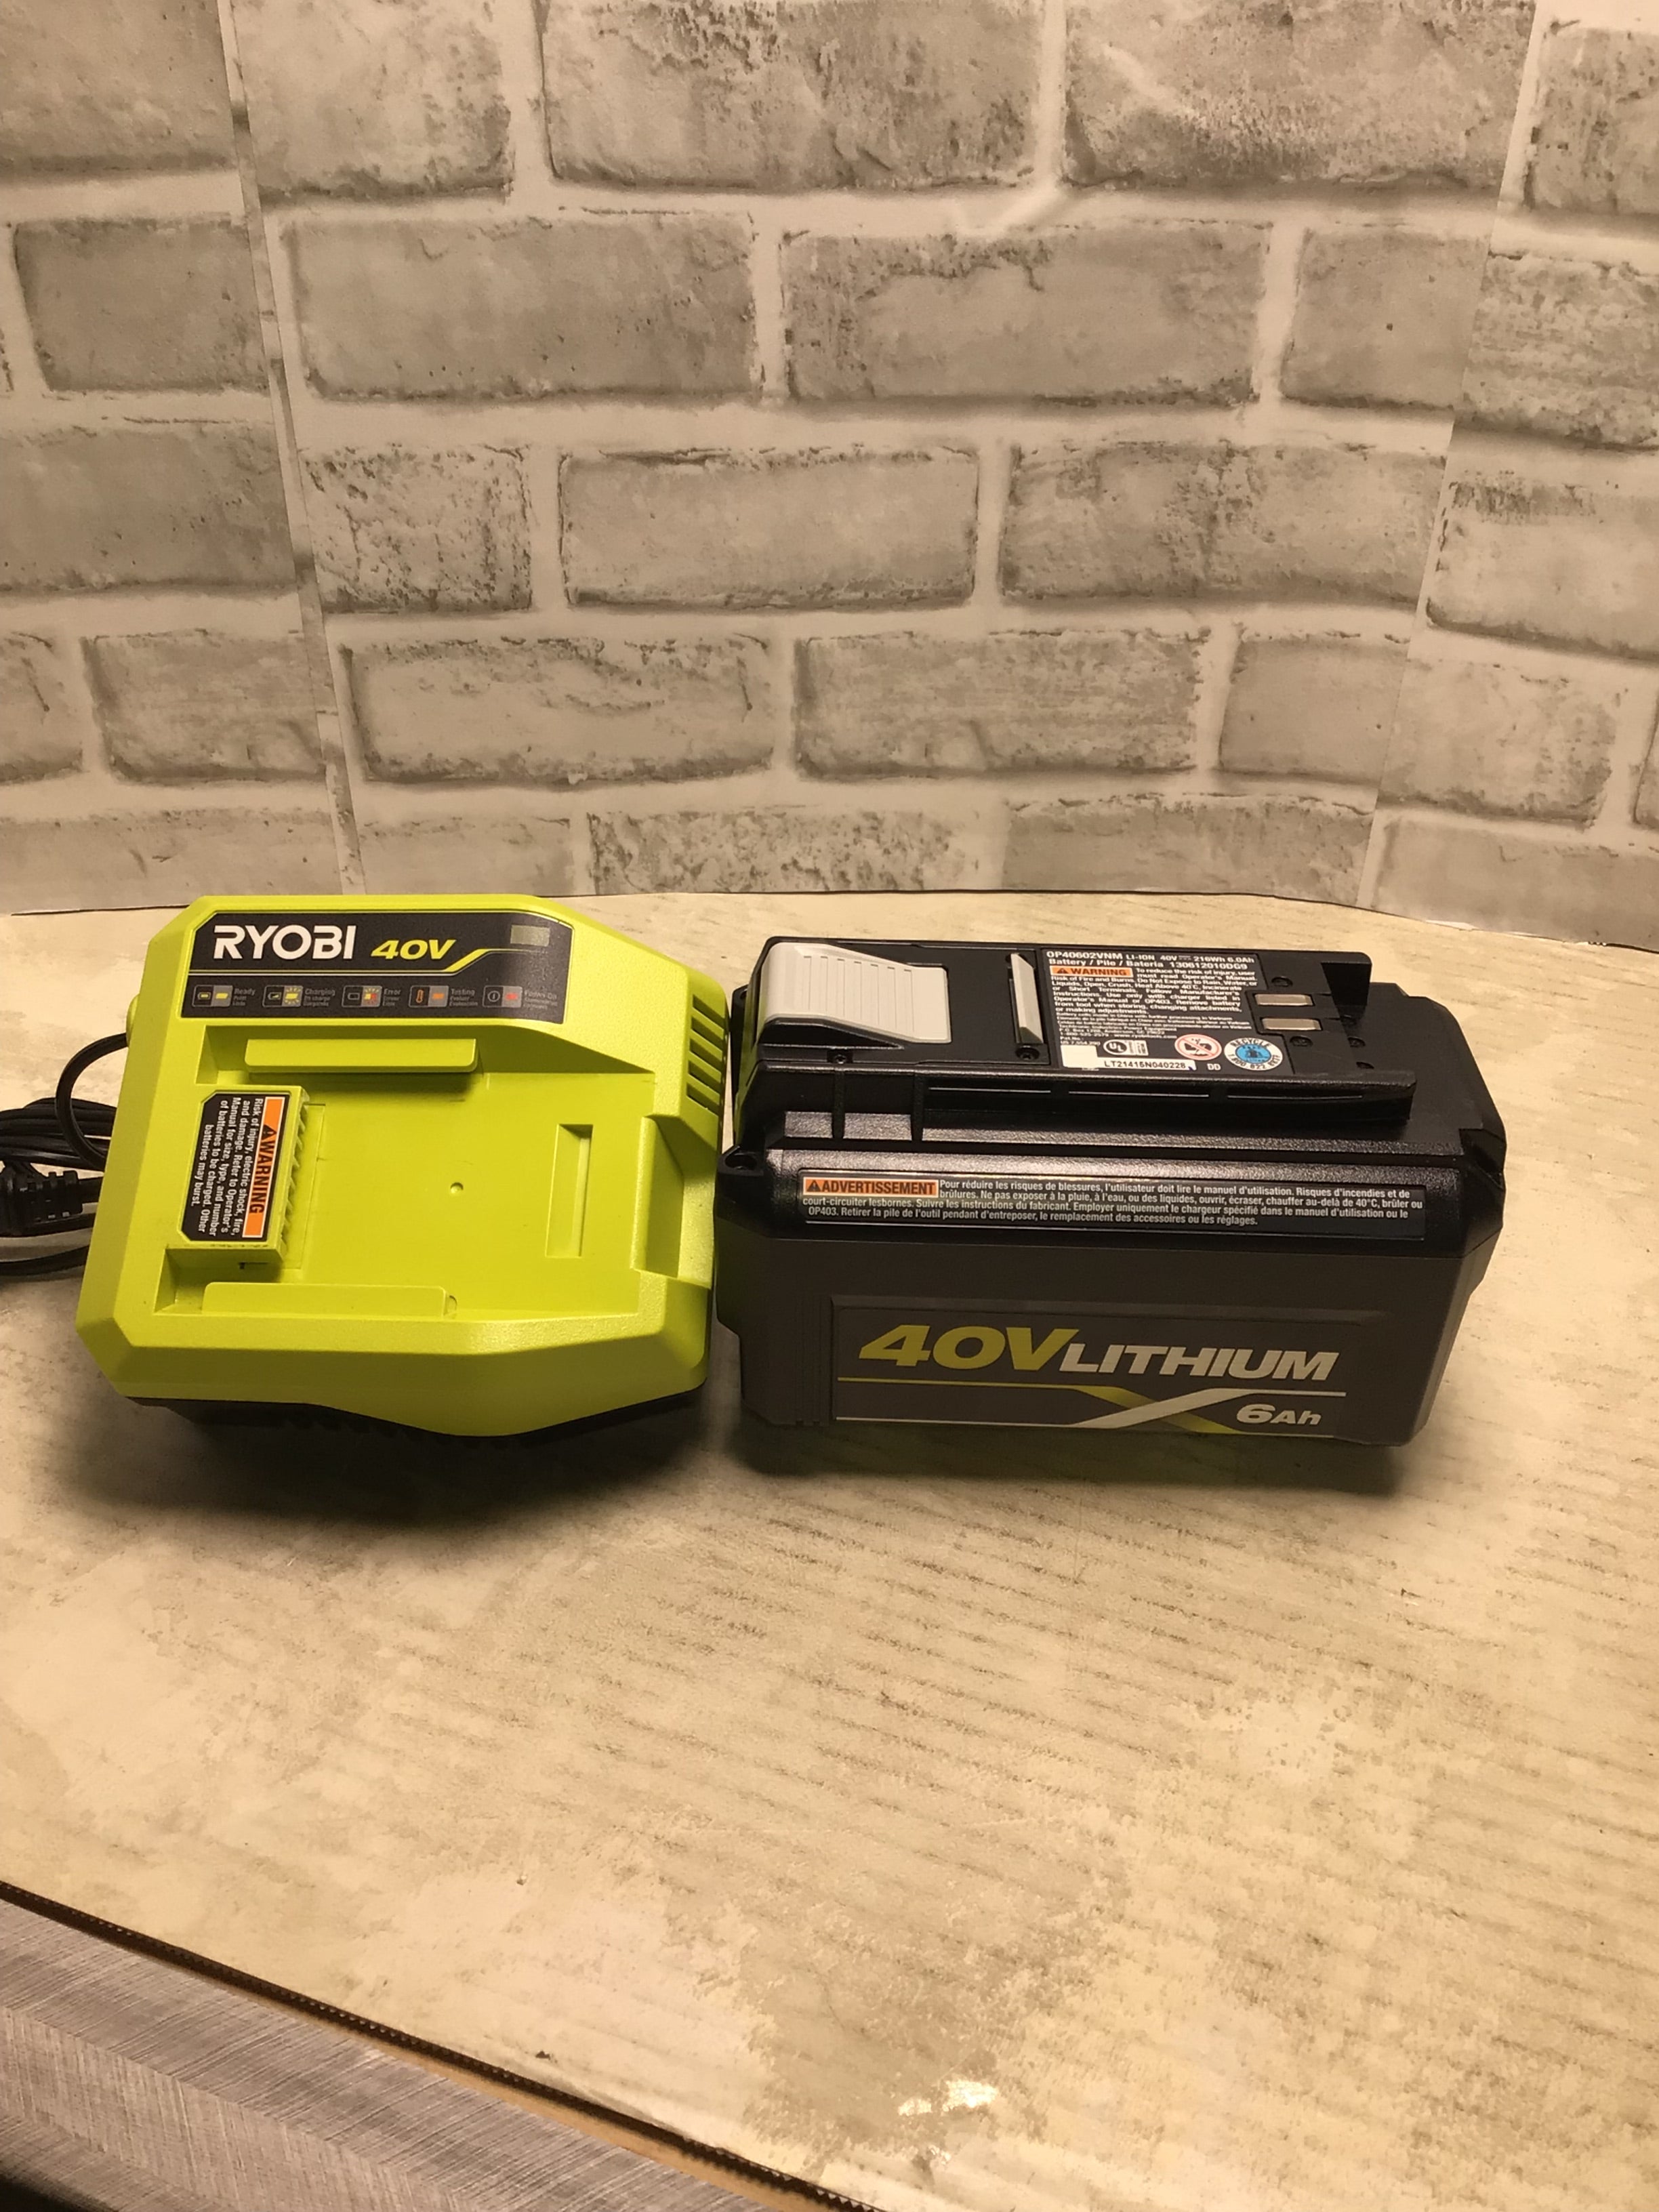 Ryobi OP40602VNM 40v 6Ah Lithium Battery And Charger (7752996356334)